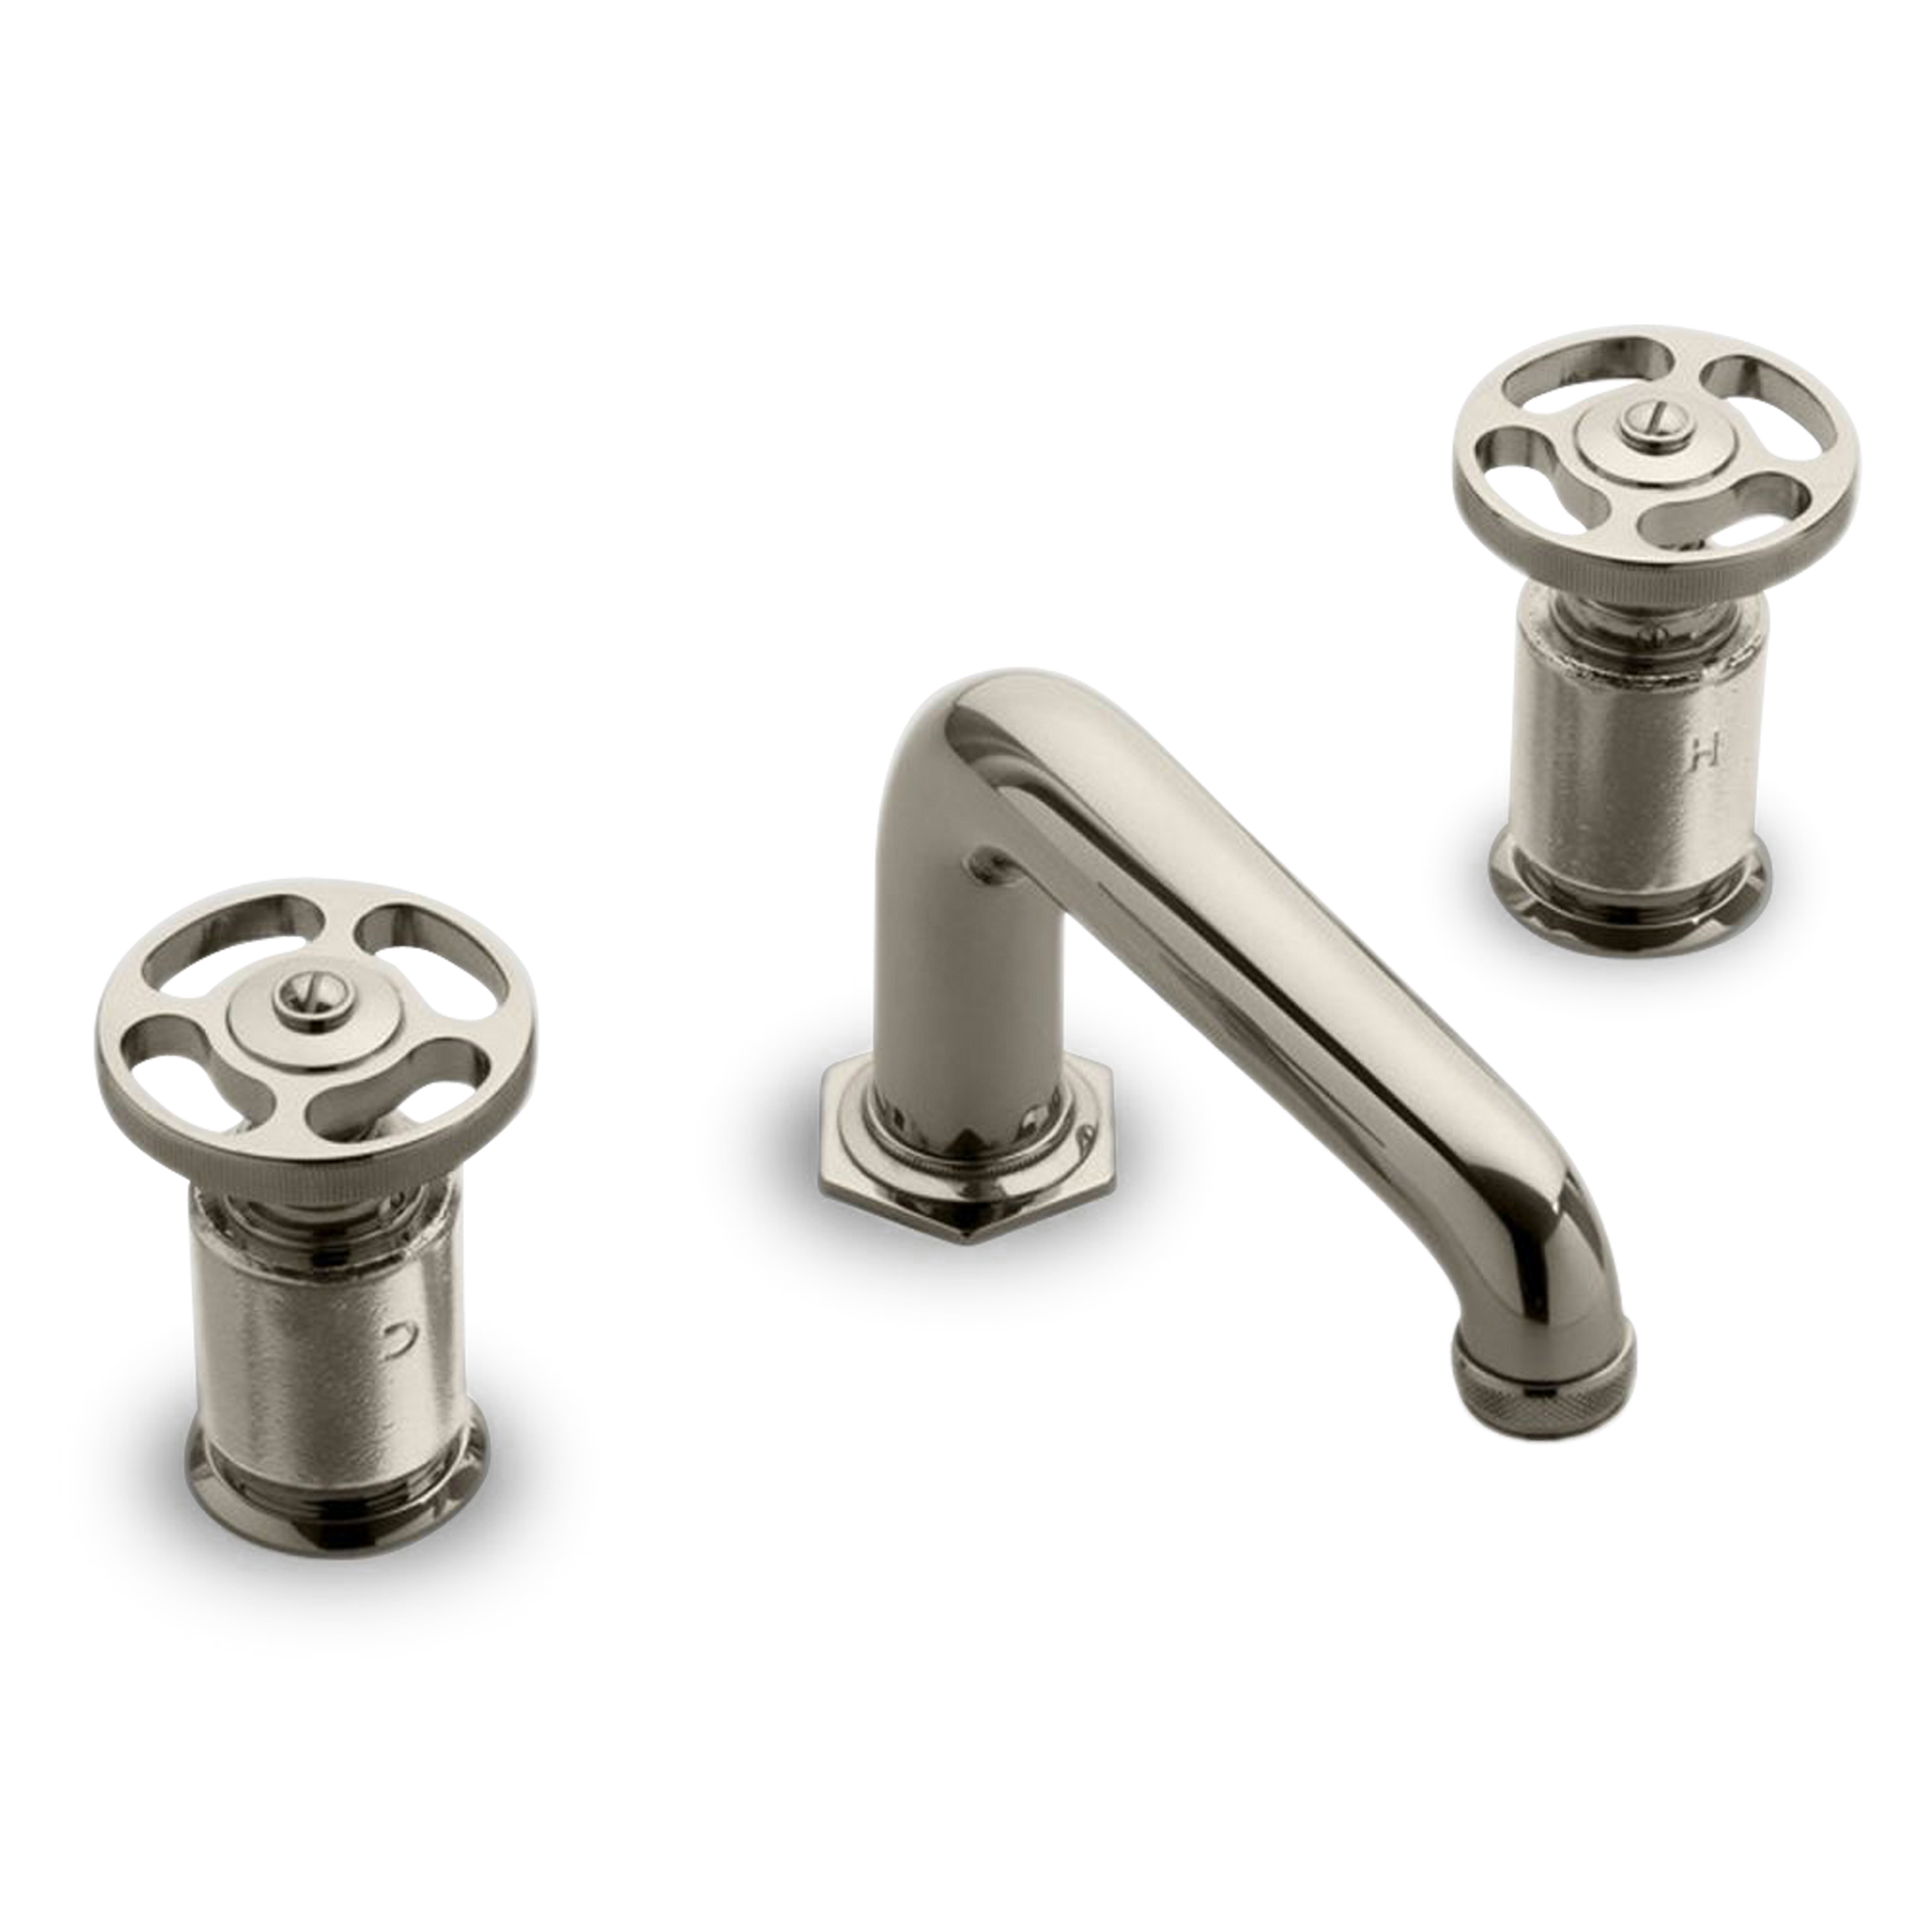 An industrial-inspired widespread faucet with wheel handles.